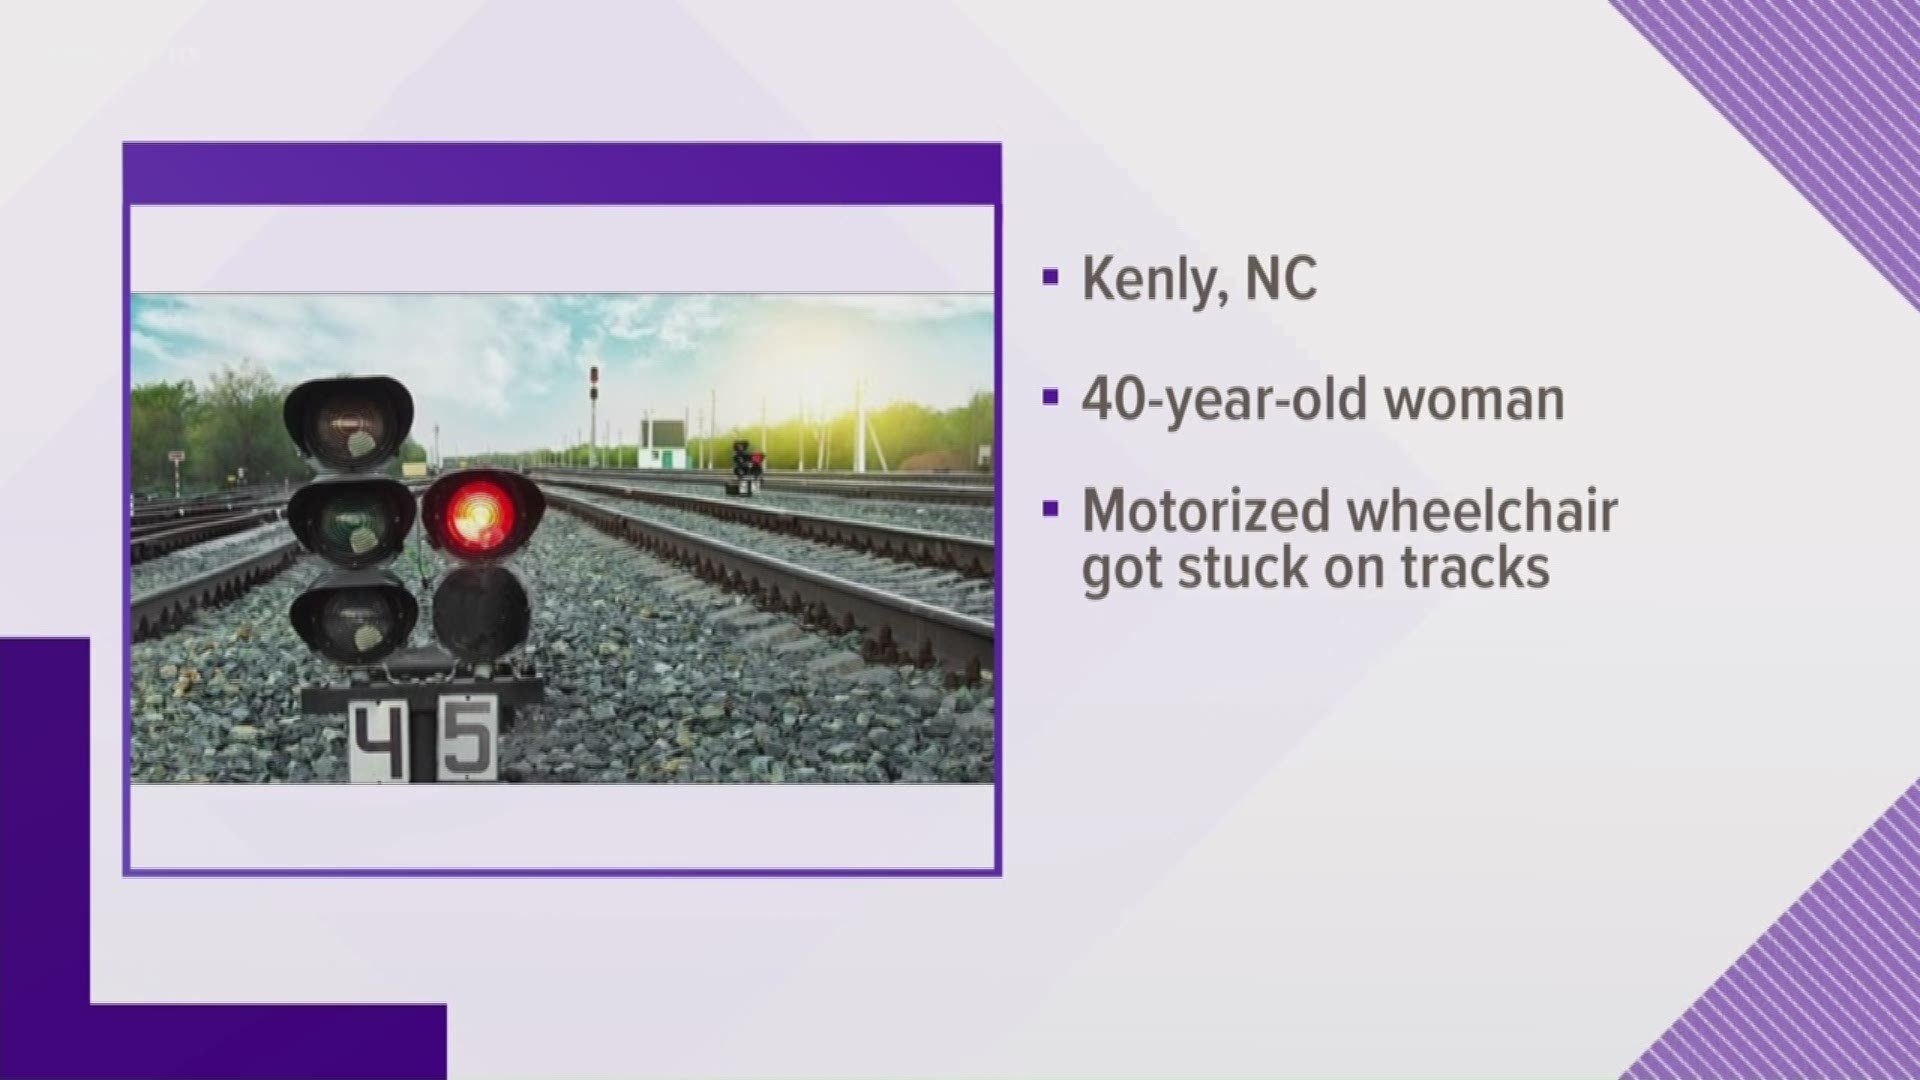 A North Carolina woman is dead after her motorized wheelchair got stuck while she crossed railroad tracks and she was hit by a freight train.